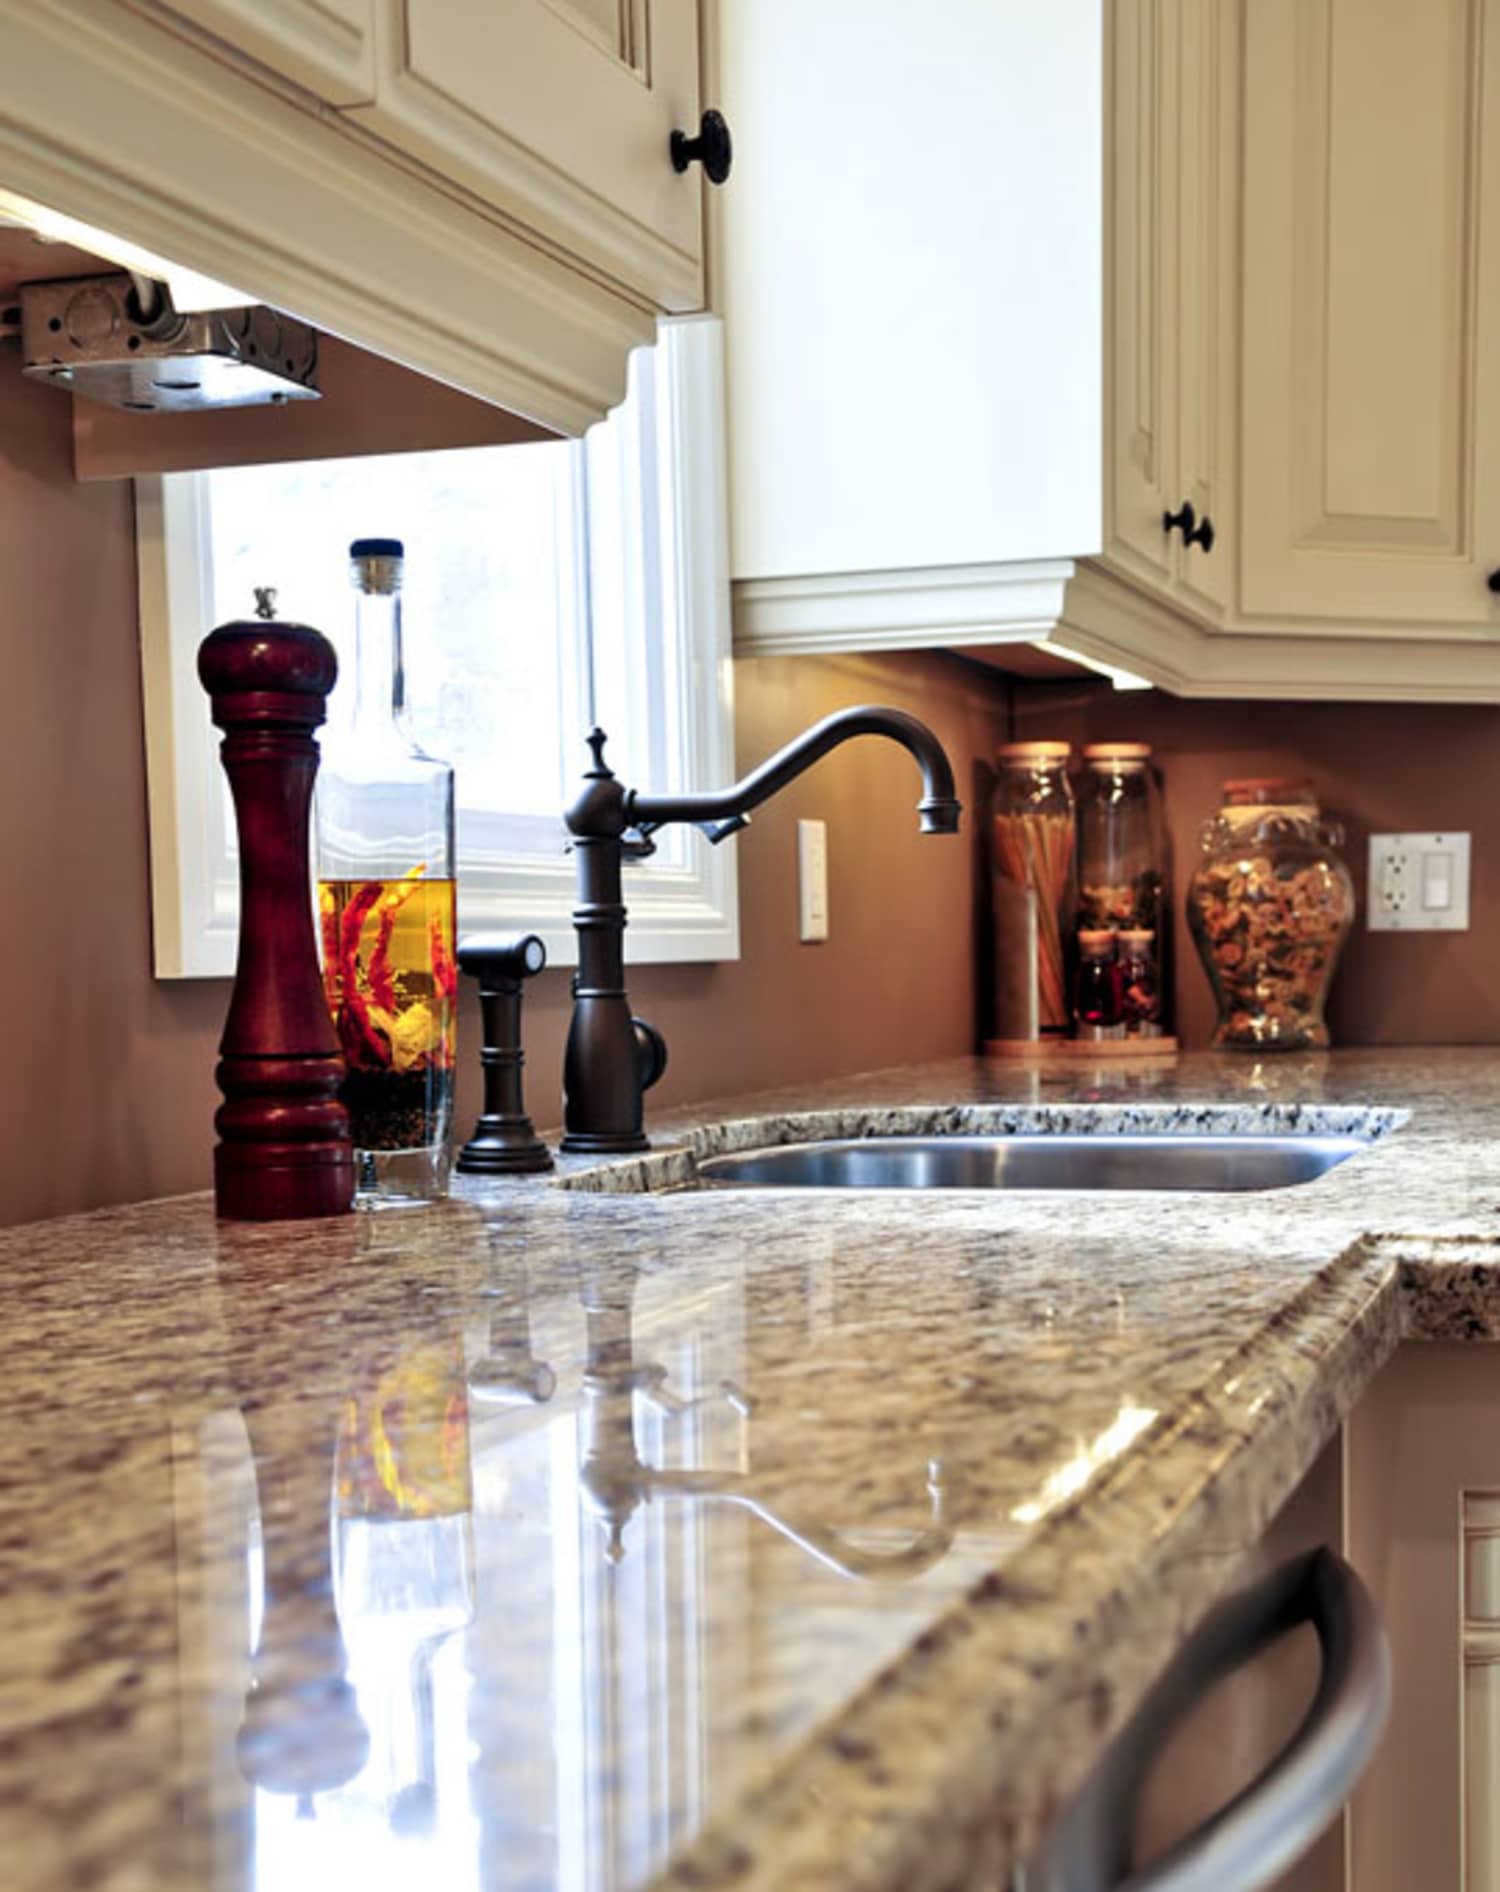 How Much Do Granite Countertops Cost? | Kitchn